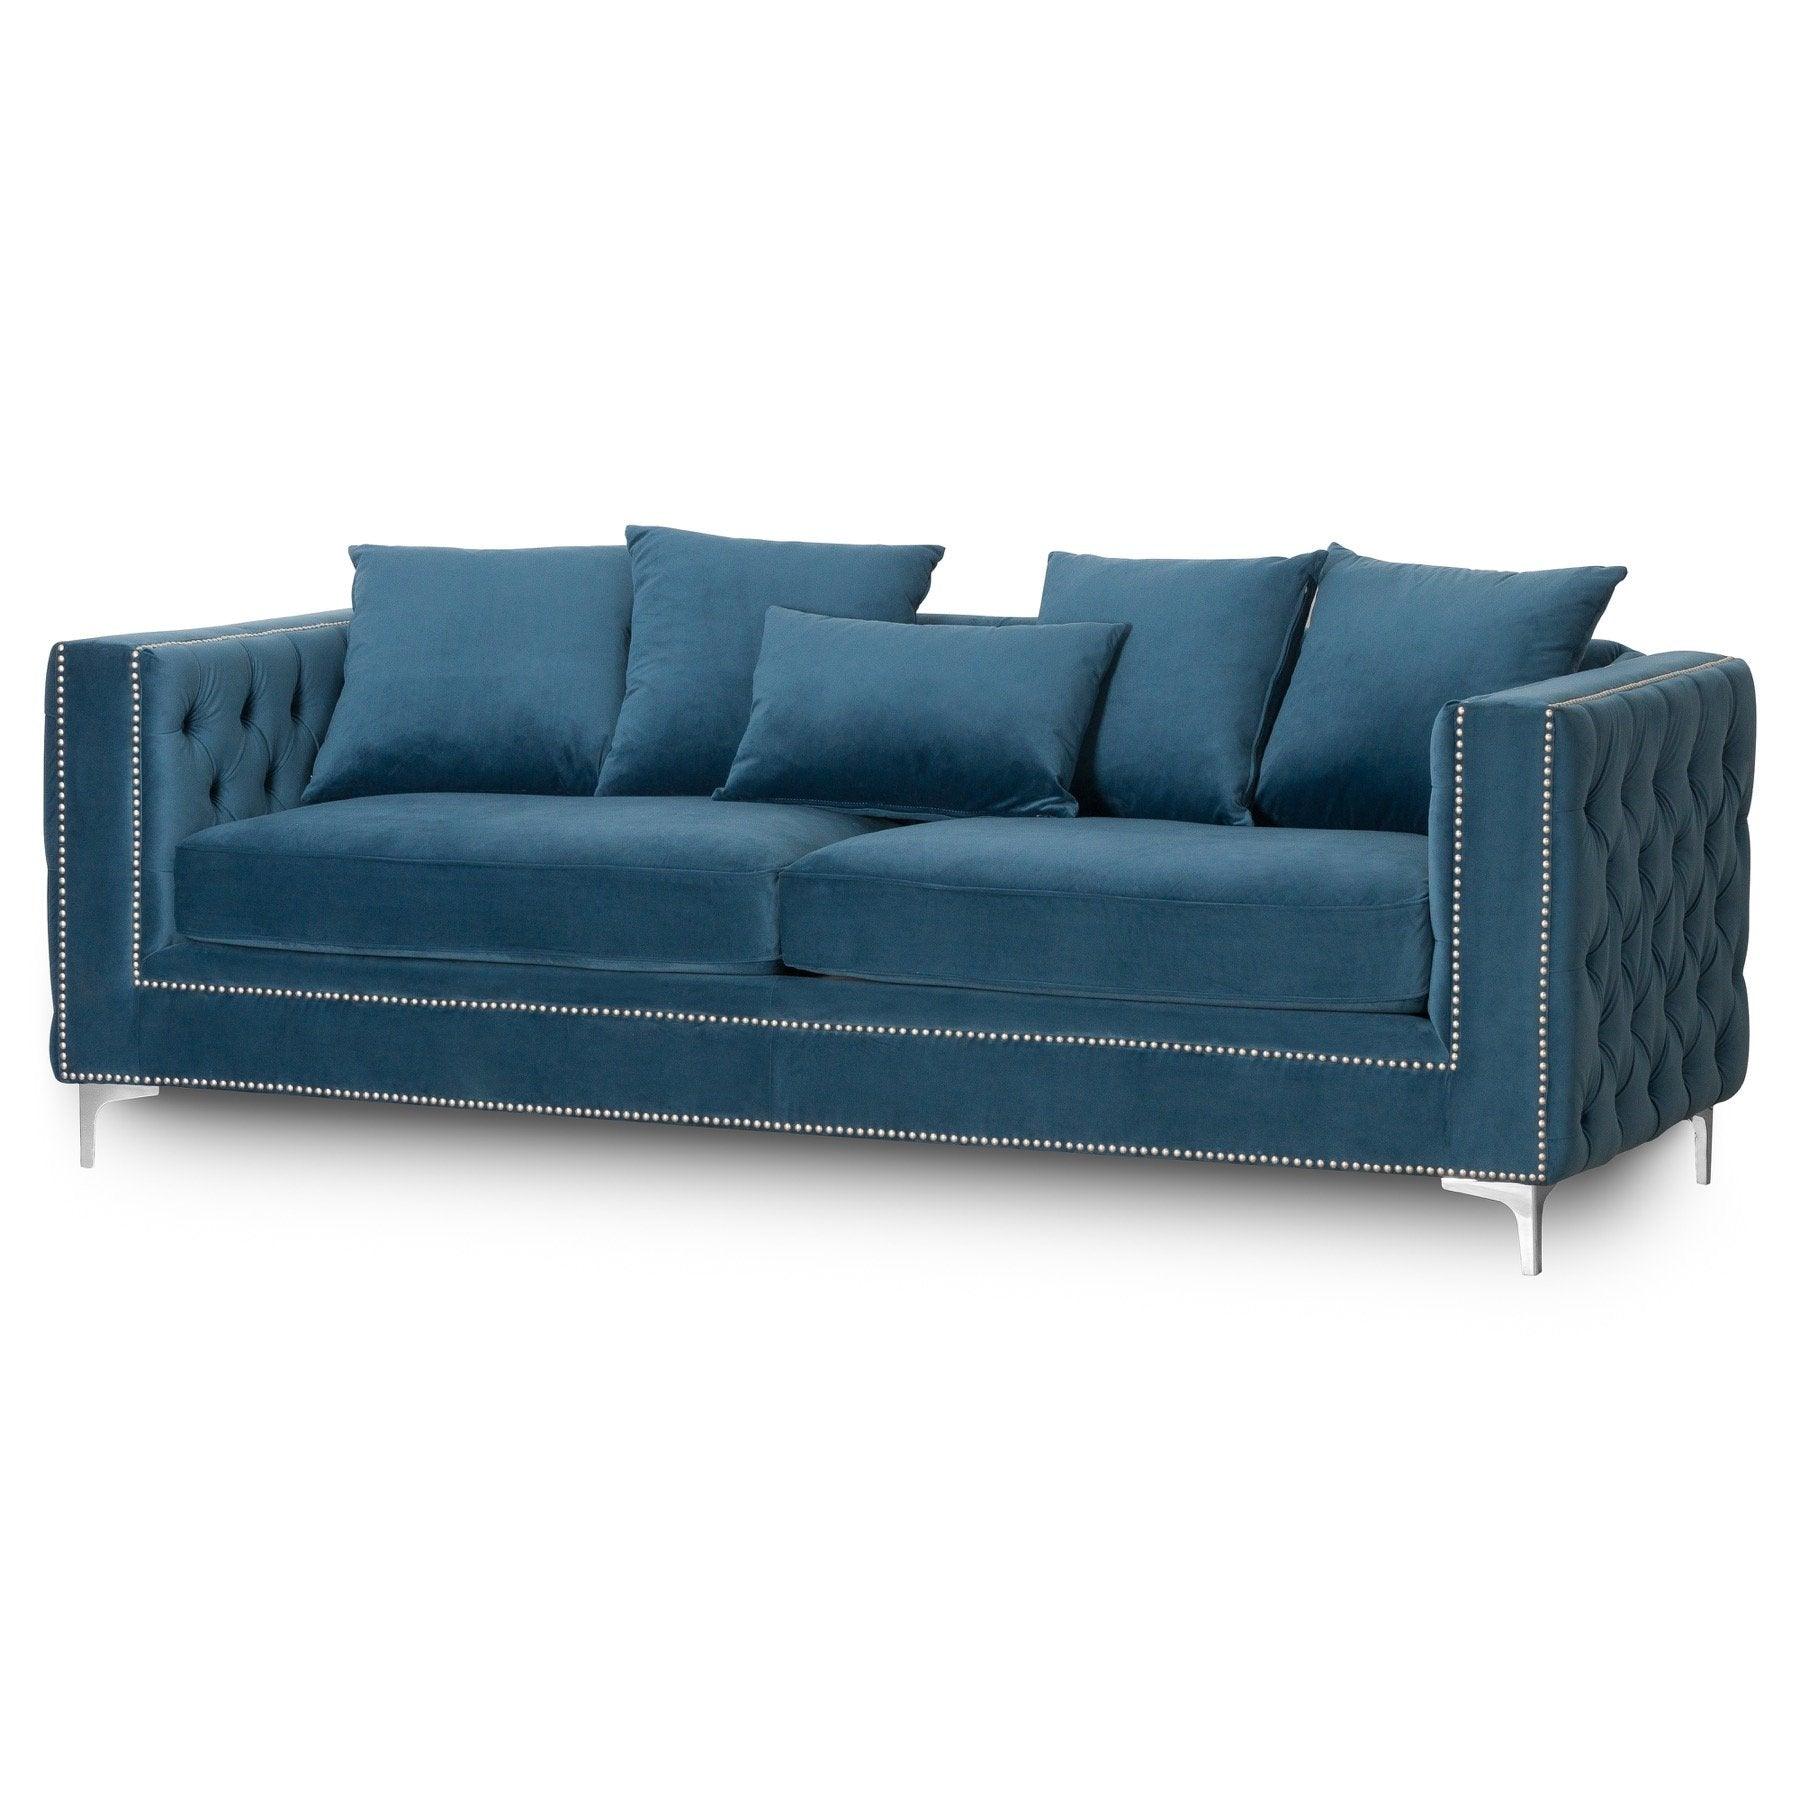 Darcy Three Seater Button Pressed Sofa - Vookoo Lifestyle